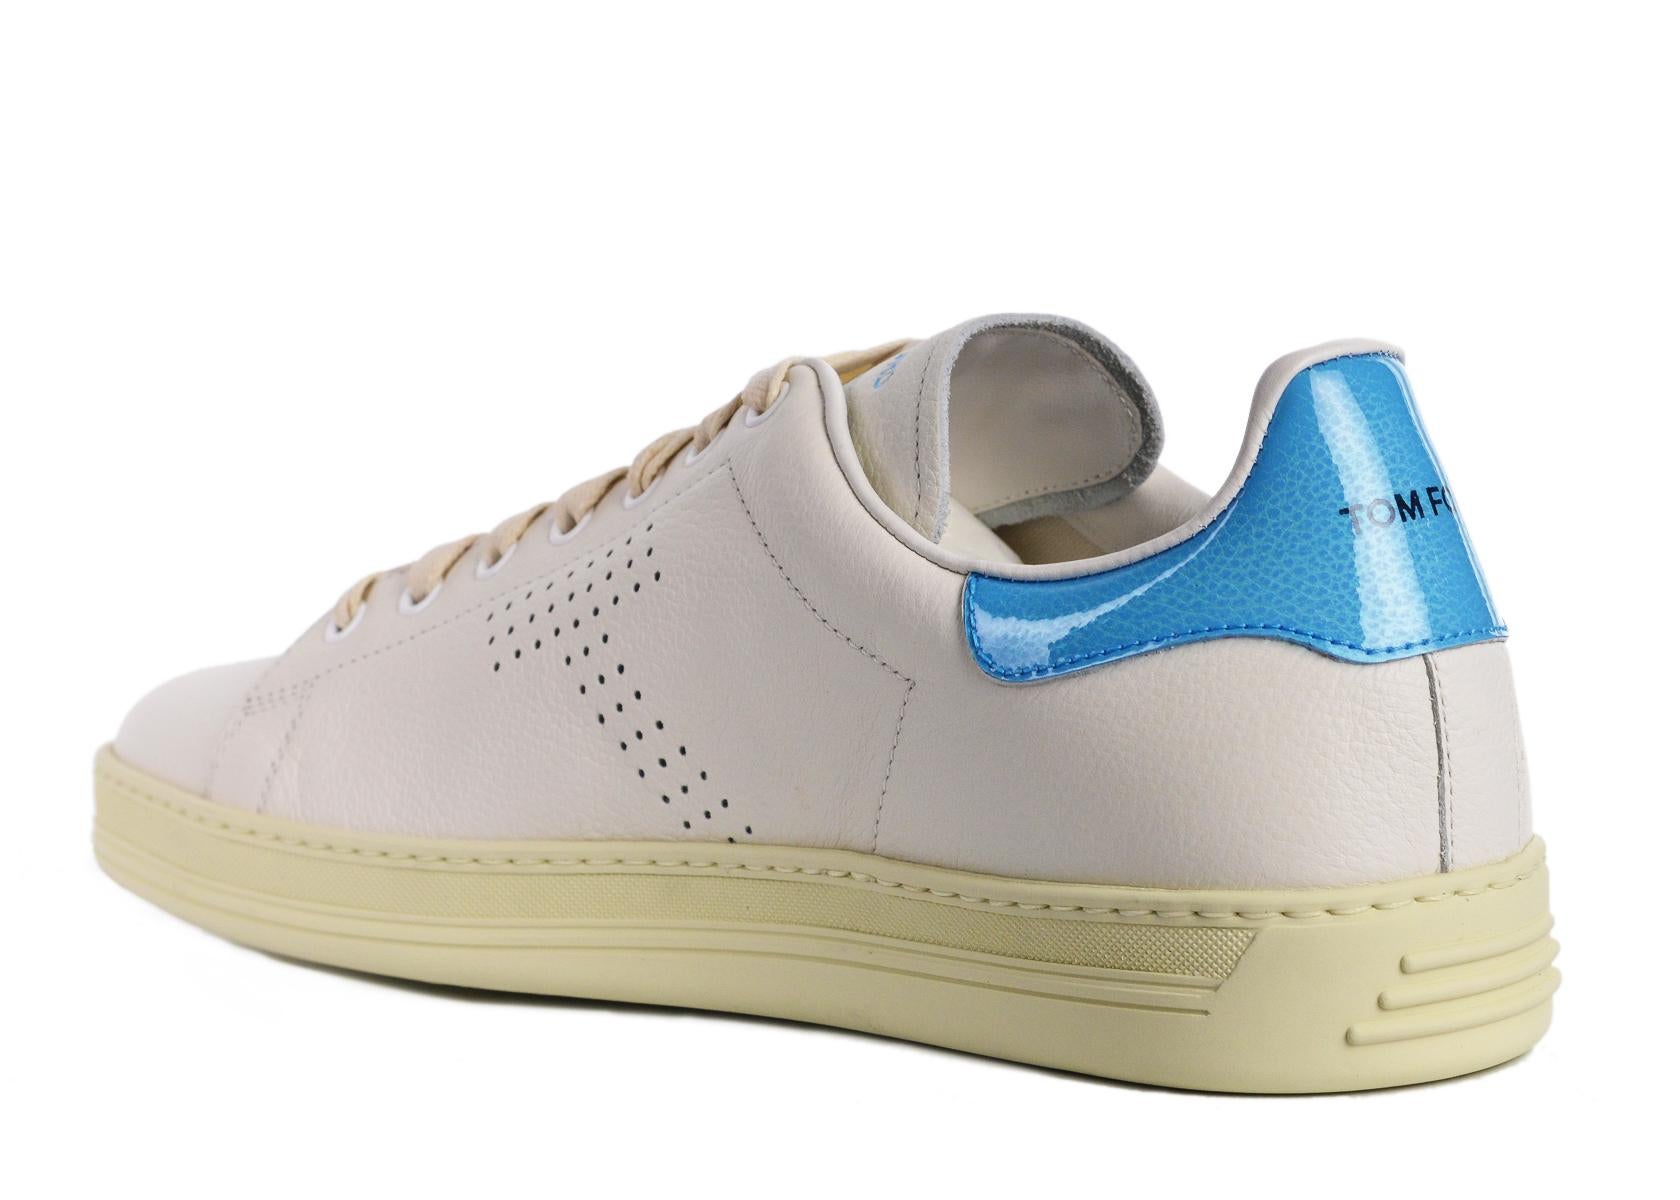 Tom Ford Mens White Blue Leather Warwick Low Top Sneakers (Beige) im Angebot